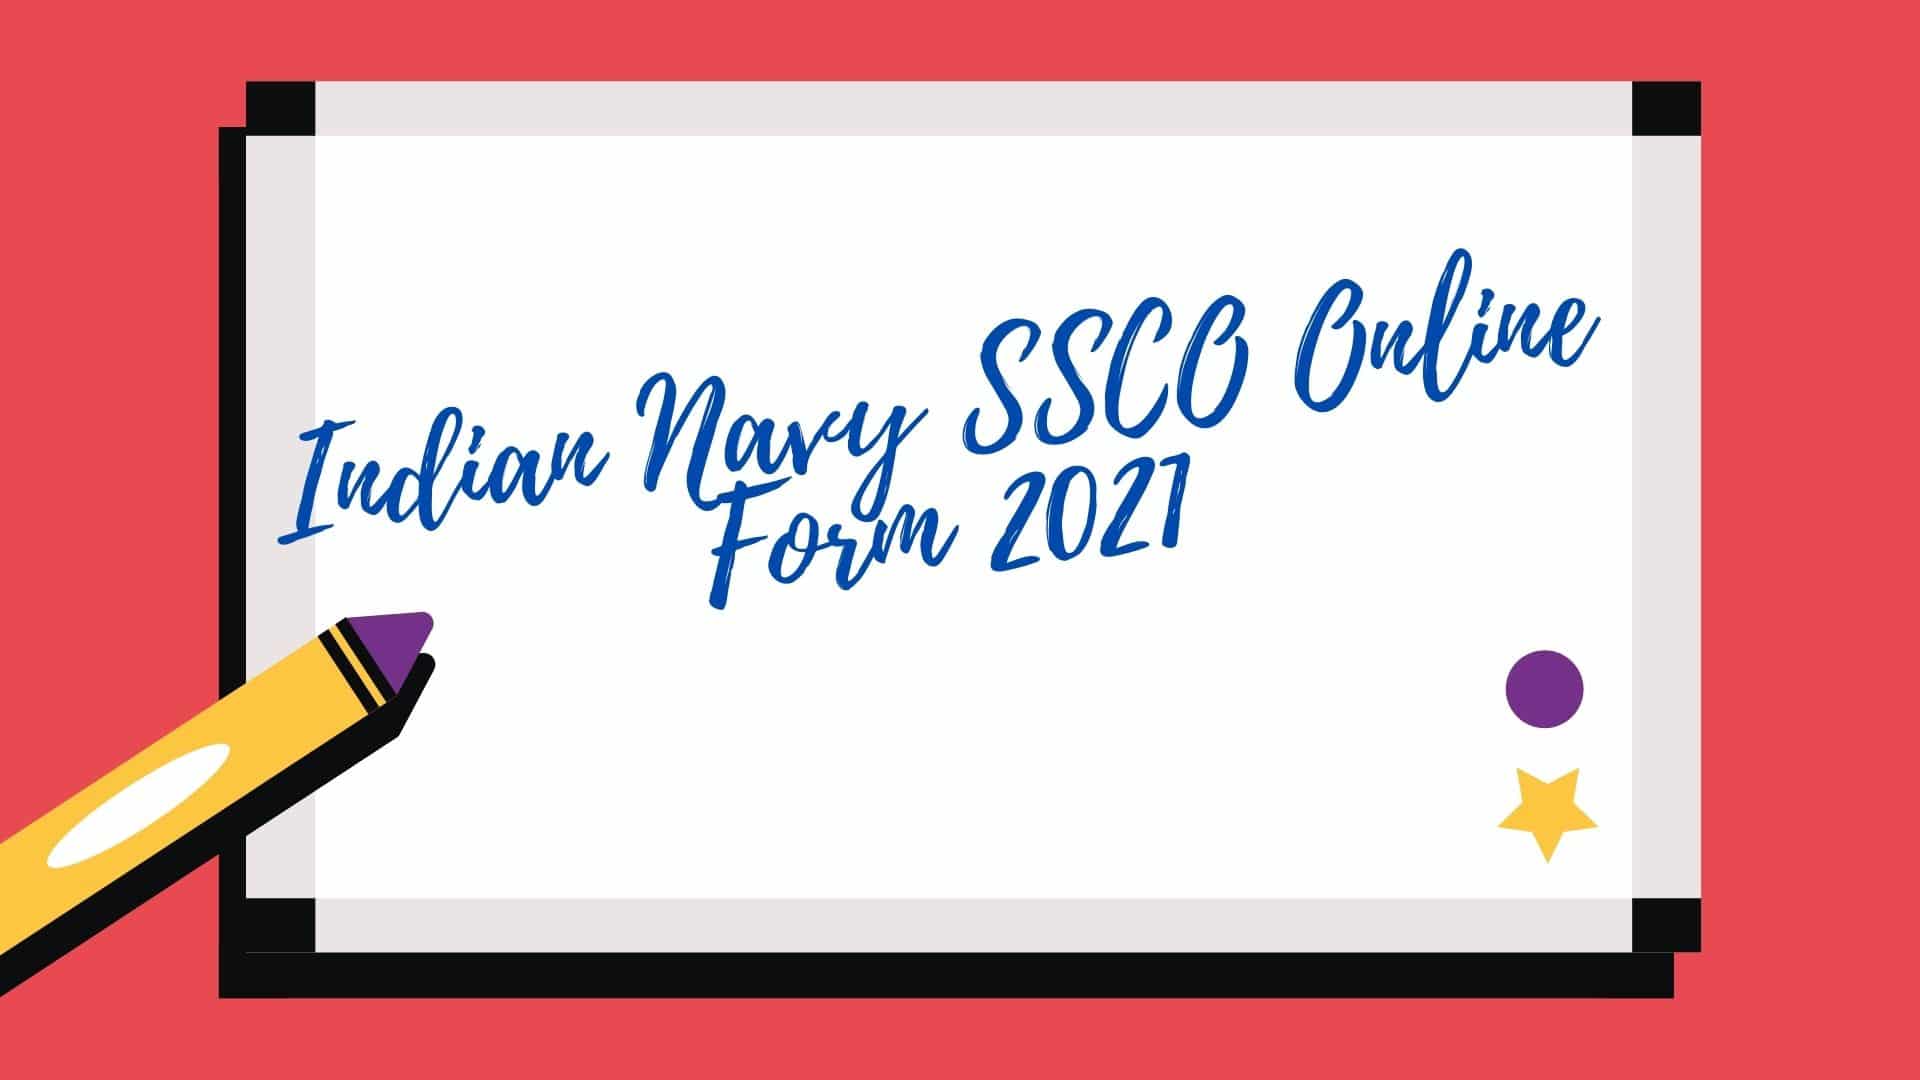 Indian Navy SSCO Online Form 2021